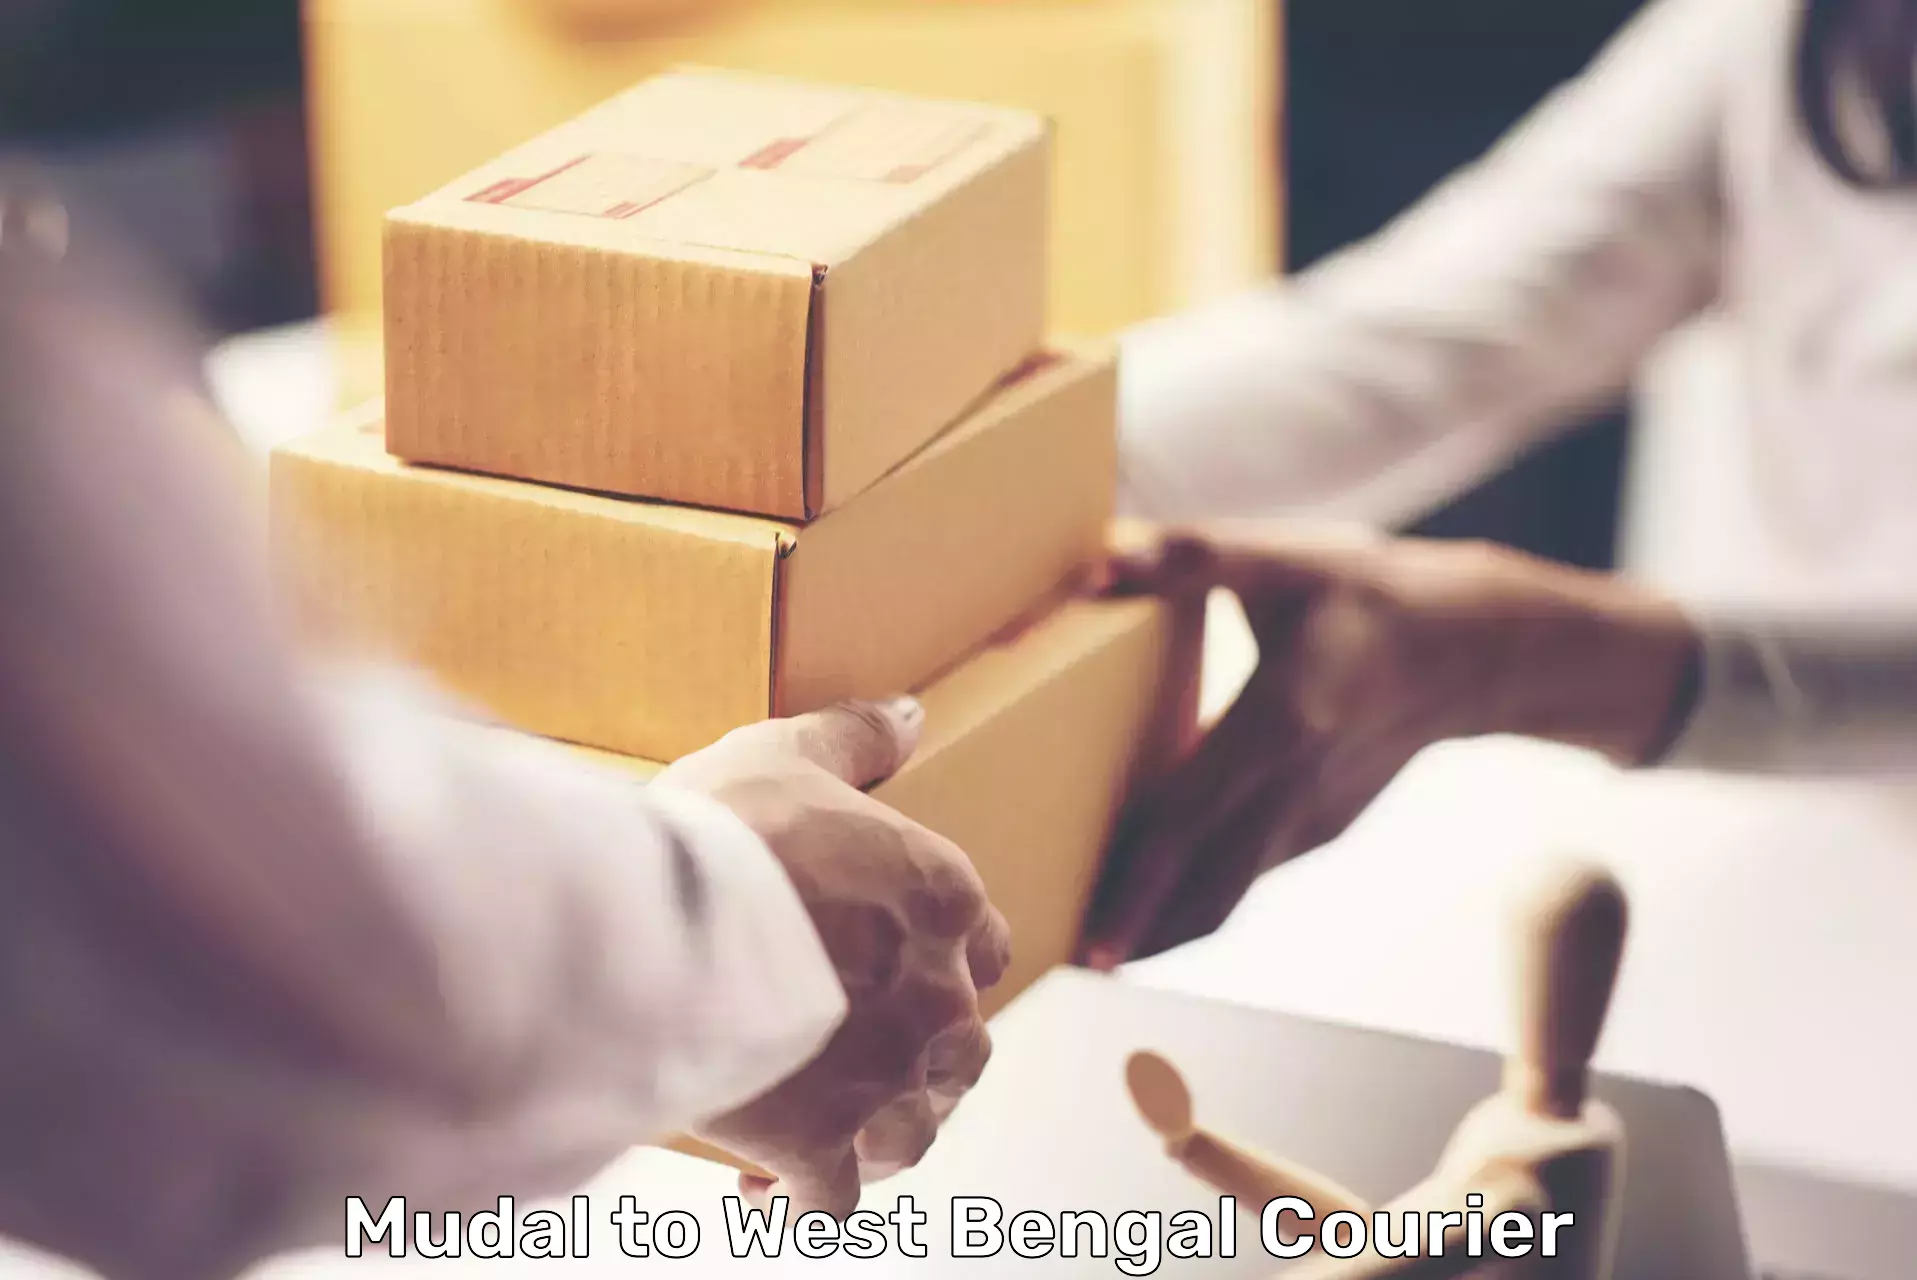 Custom courier packaging in Mudal to Alipore